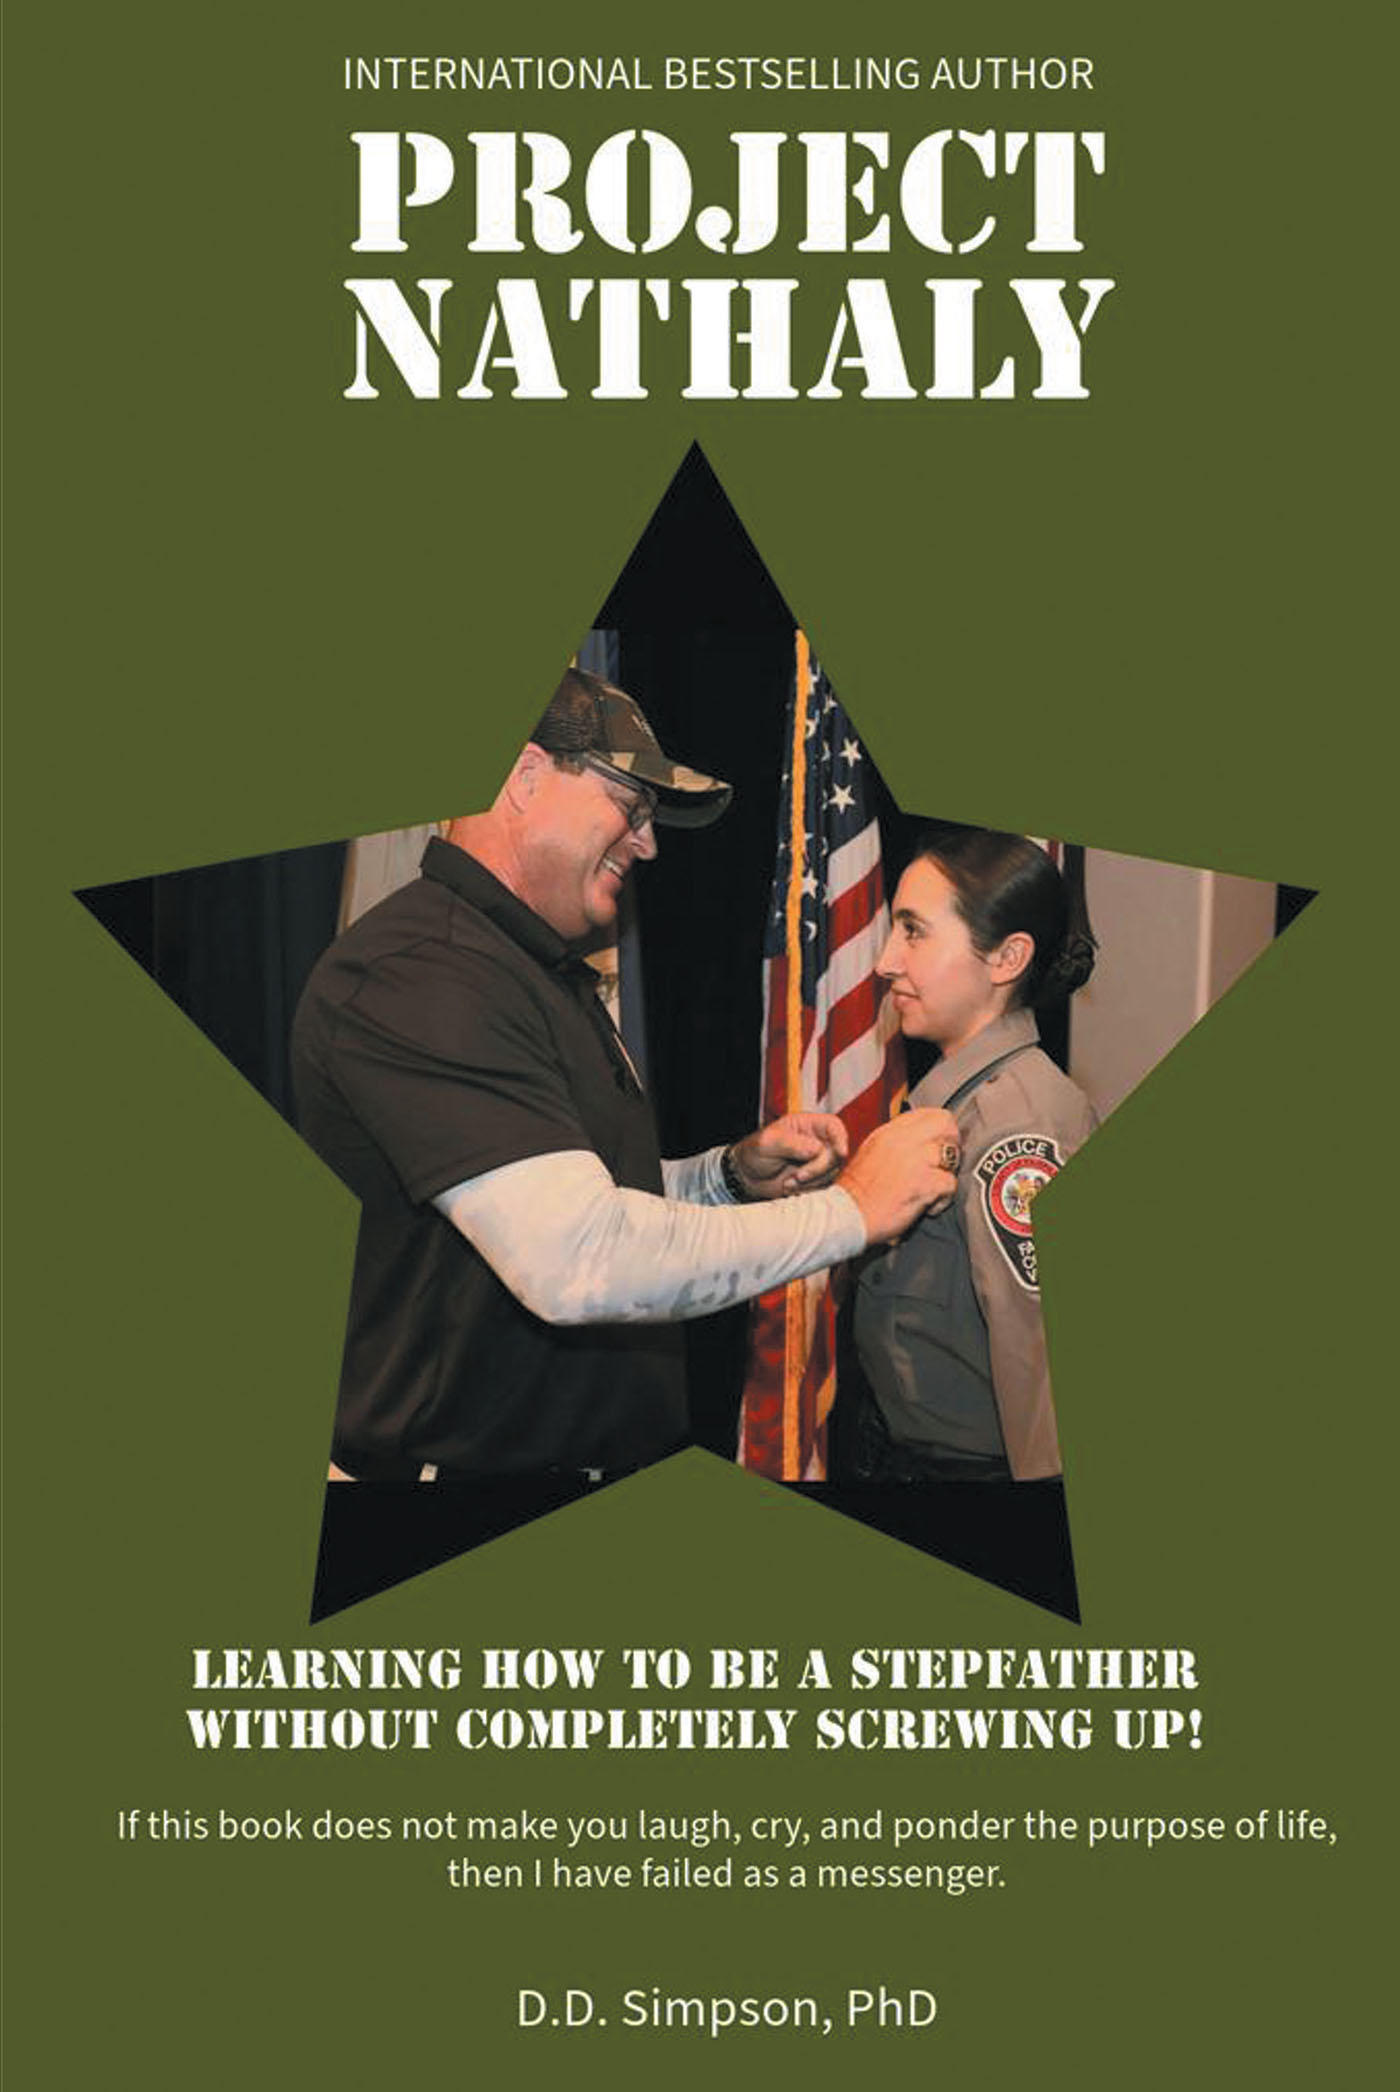 Author D.D. Simpson, Ph.D.’s New Book, “Project Nathaly: Learning How to be a Stepfather Without Completely Screwing Up,” Offers Advice for Stepparents